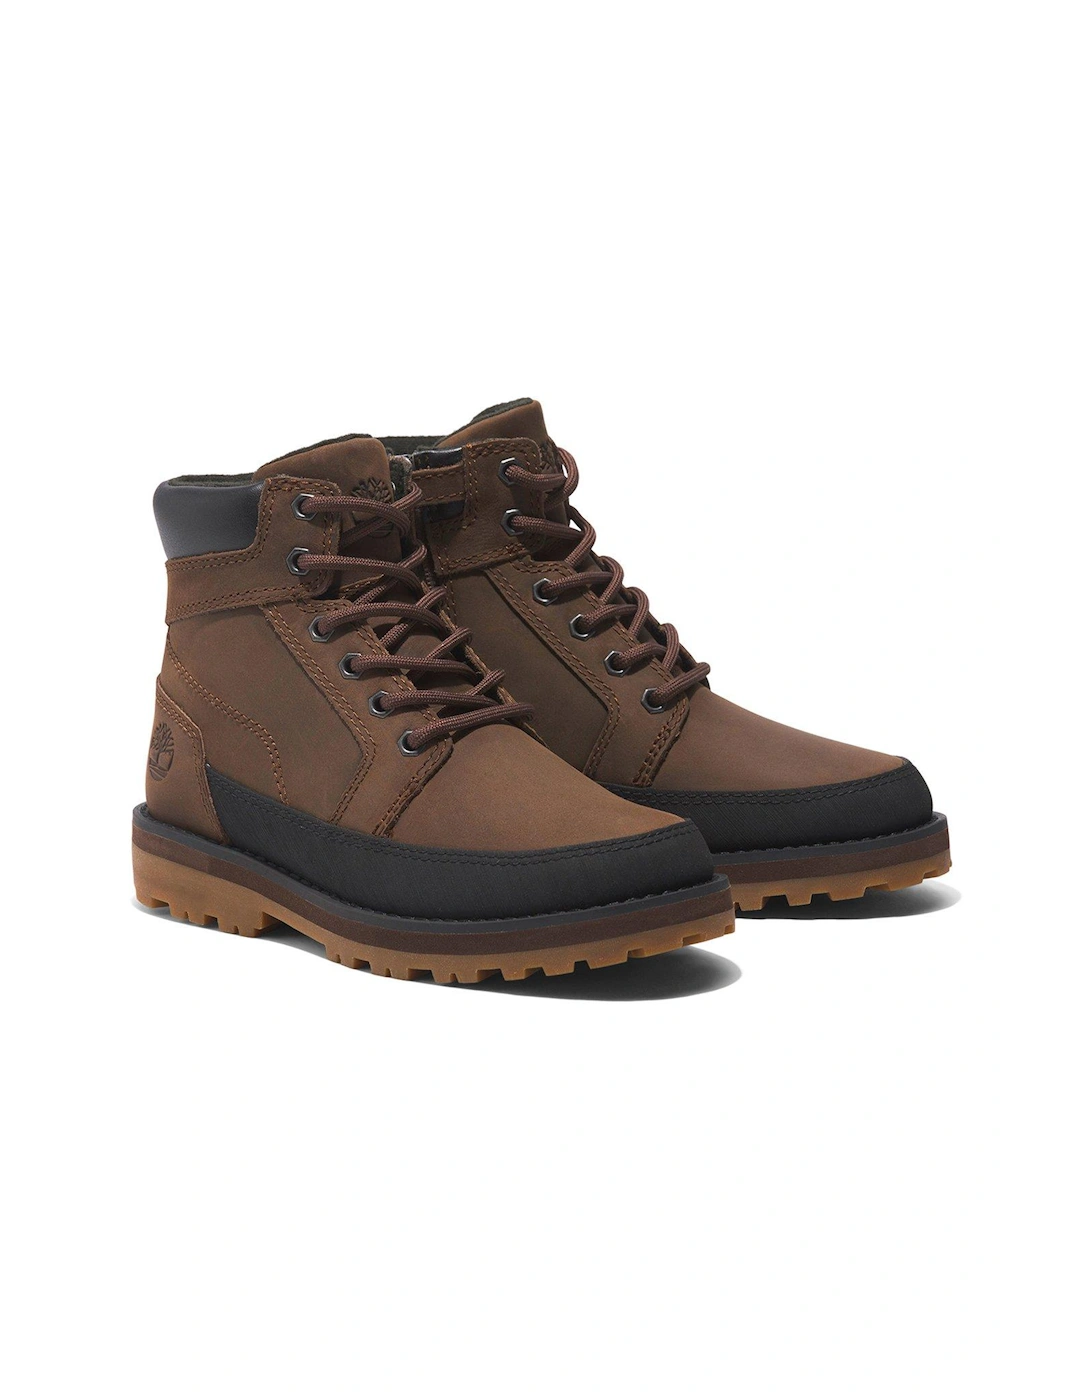 Courma Kid Leather Boot W/ Rand Boot